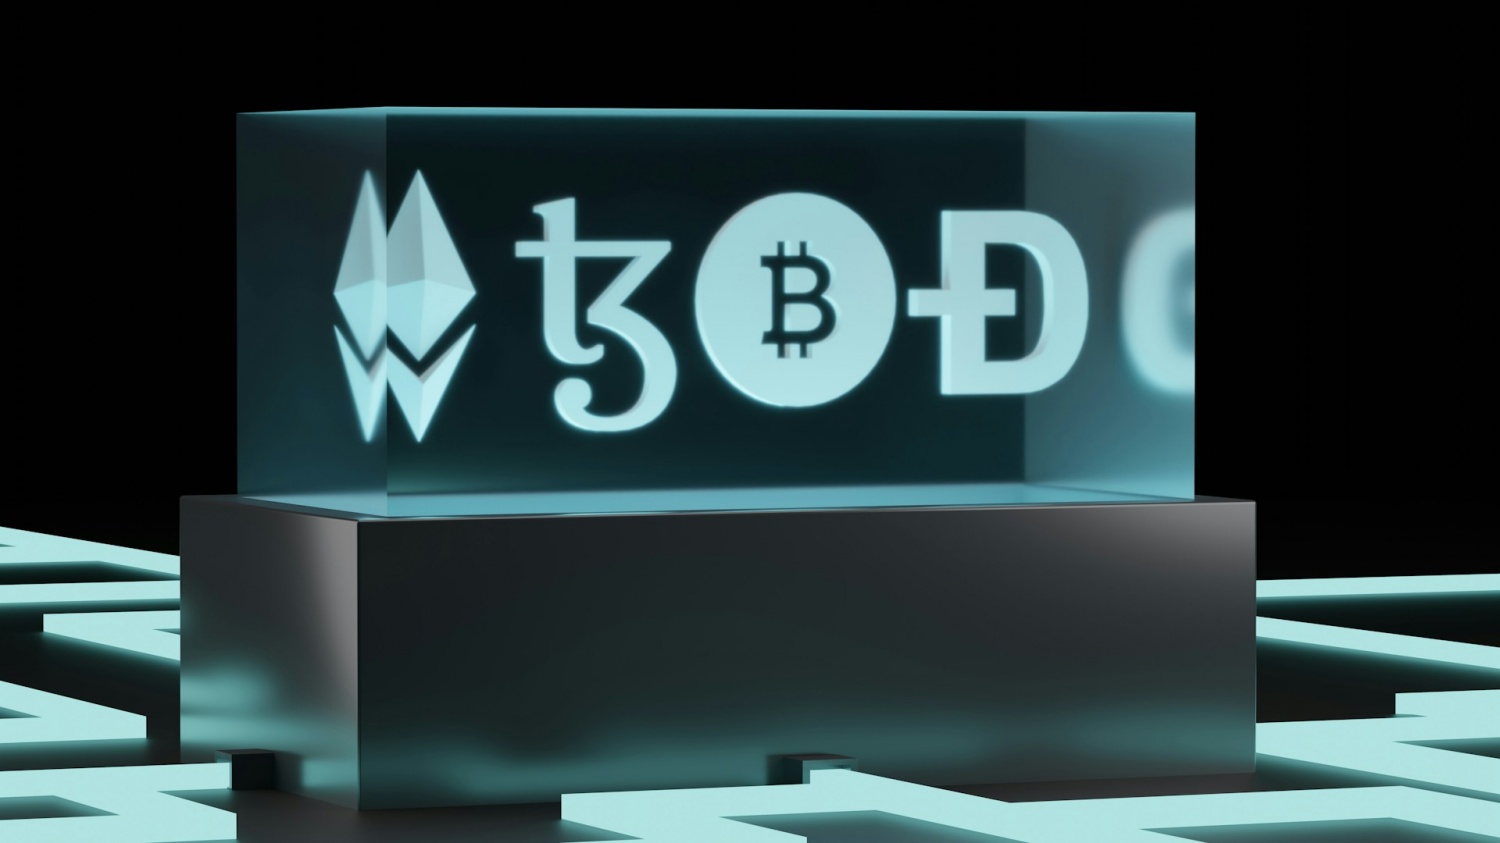 3D illustration of Tezos coin, bitcoin, Ehtereum, and dogecoin.